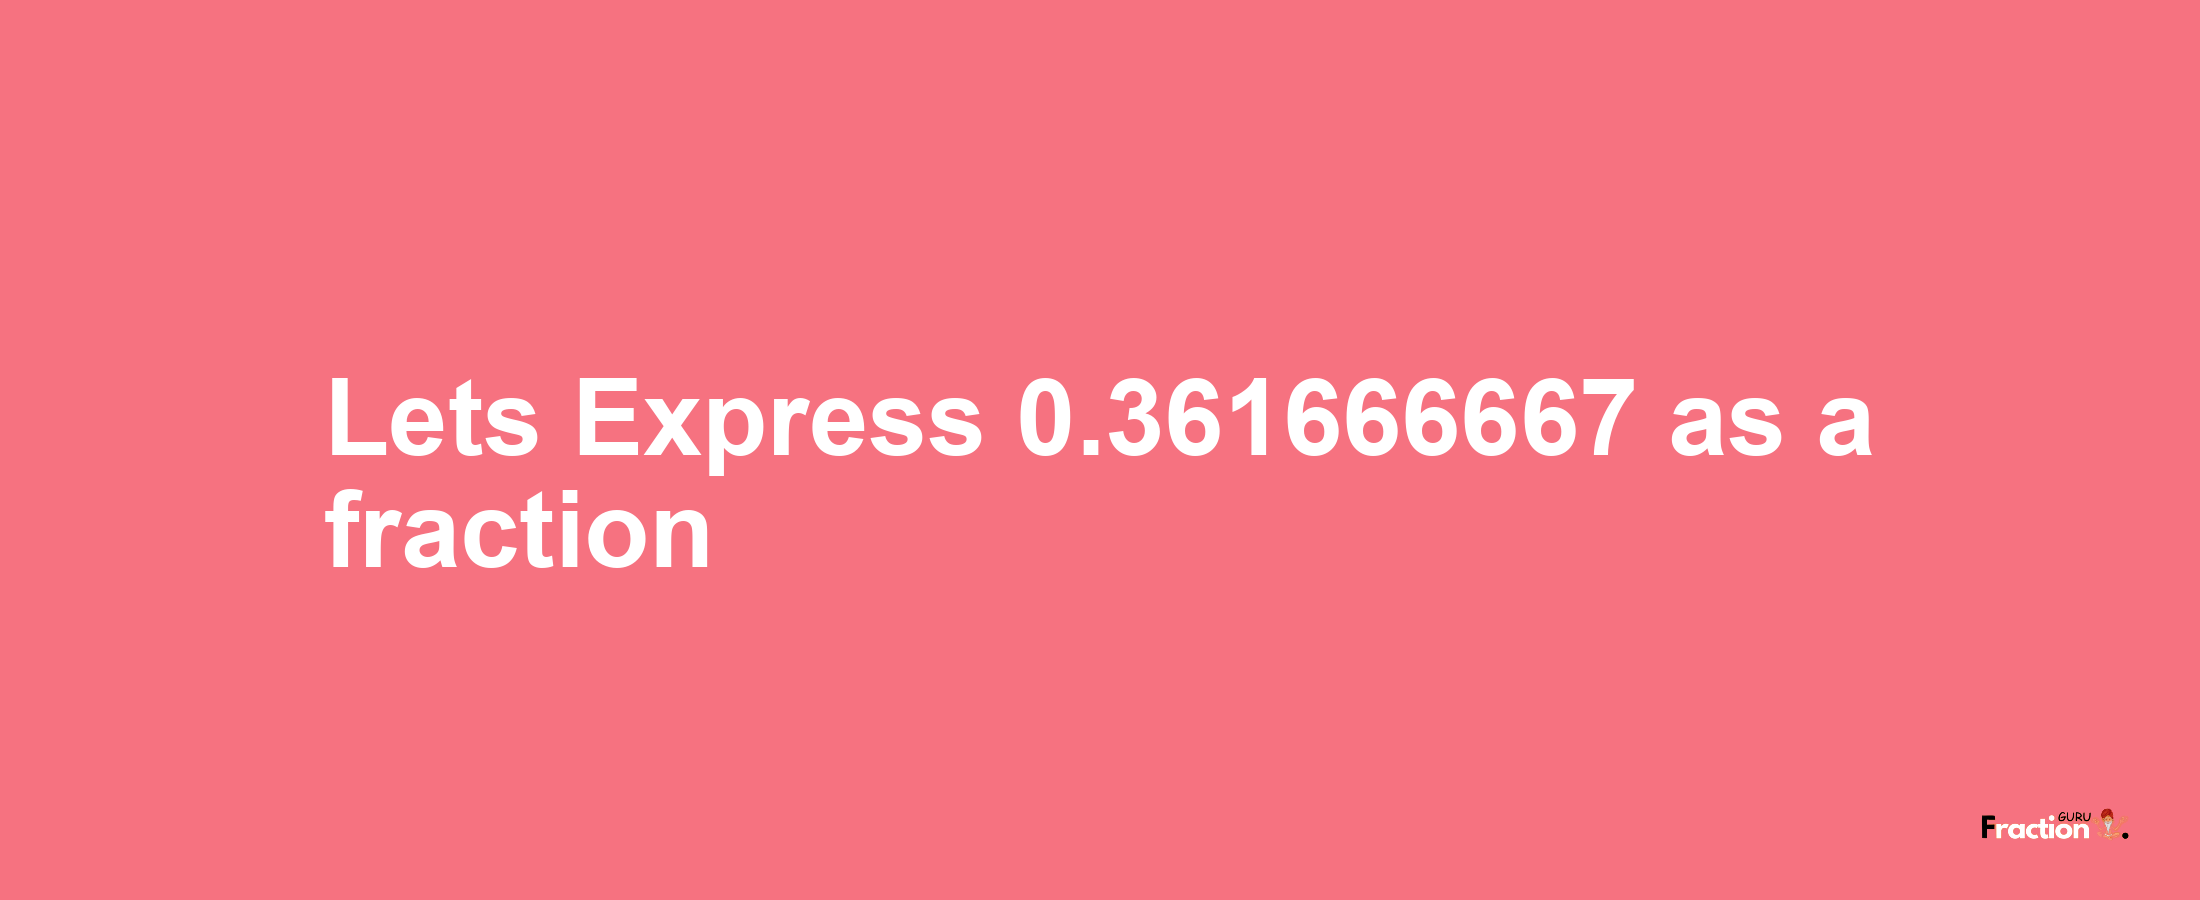 Lets Express 0.361666667 as afraction